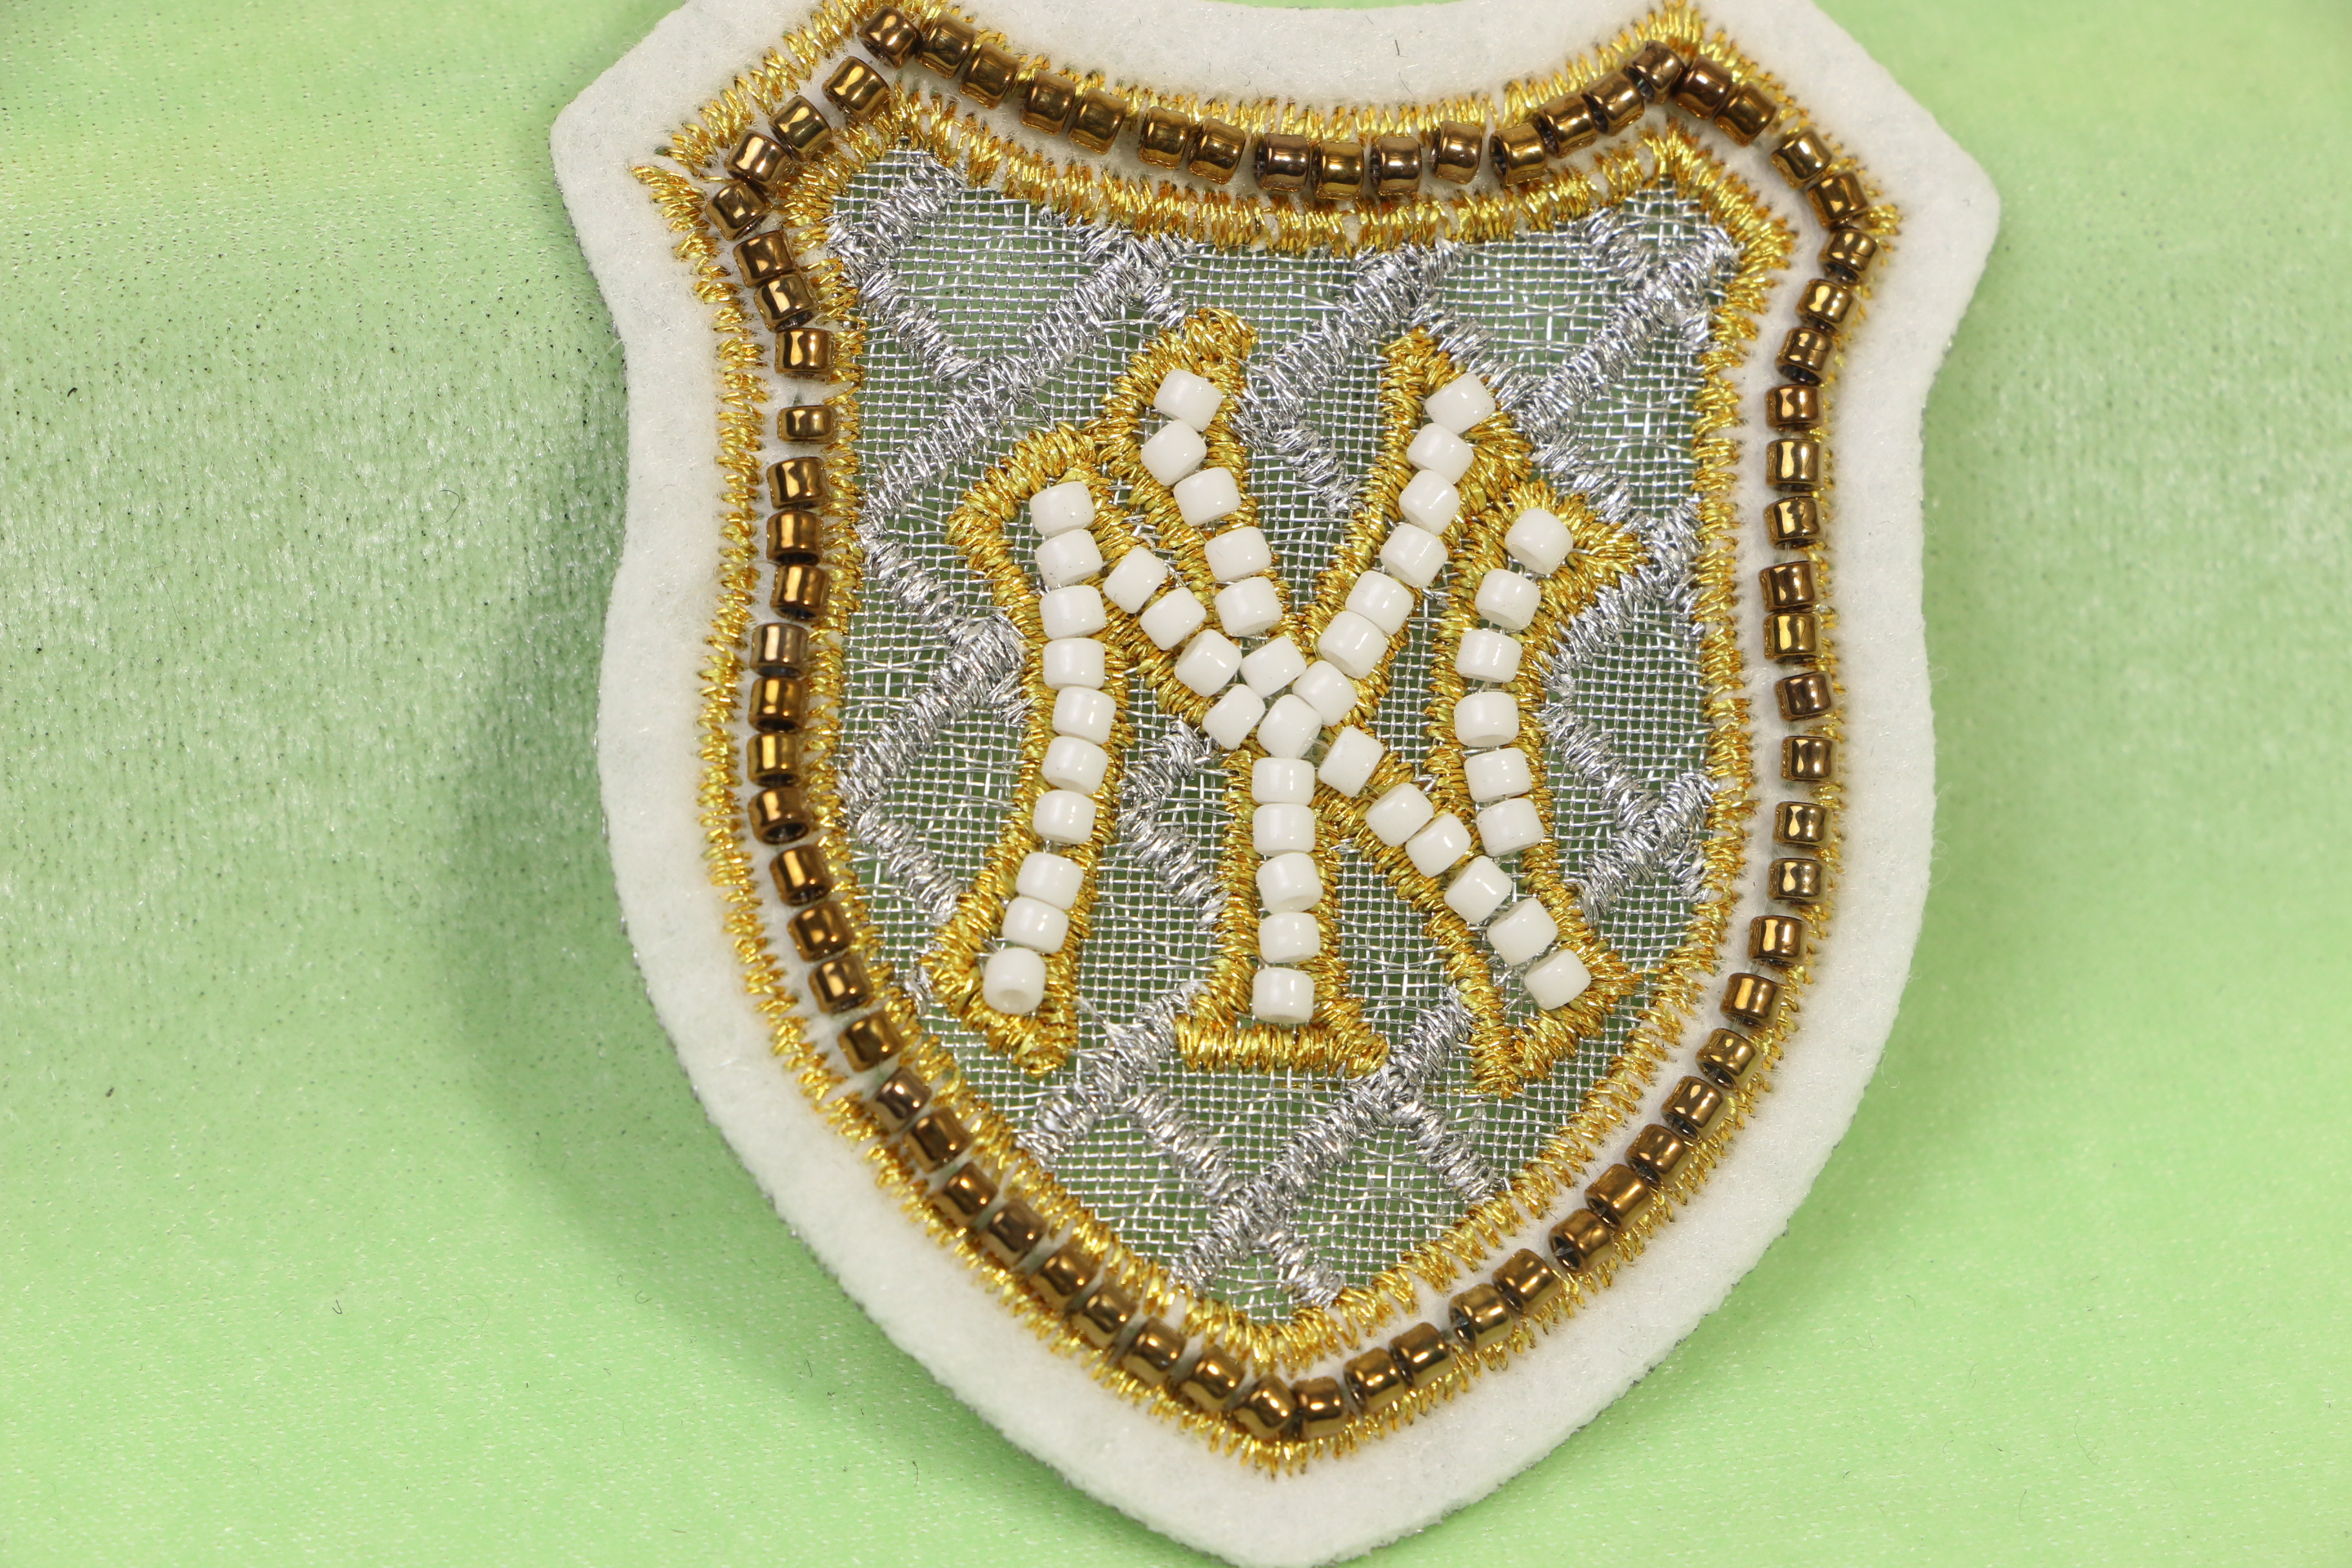  Stylish Silver Gold Metallic Embroidery Badge With White Felt Ground Beads Around For Caps Shoes Manufactures